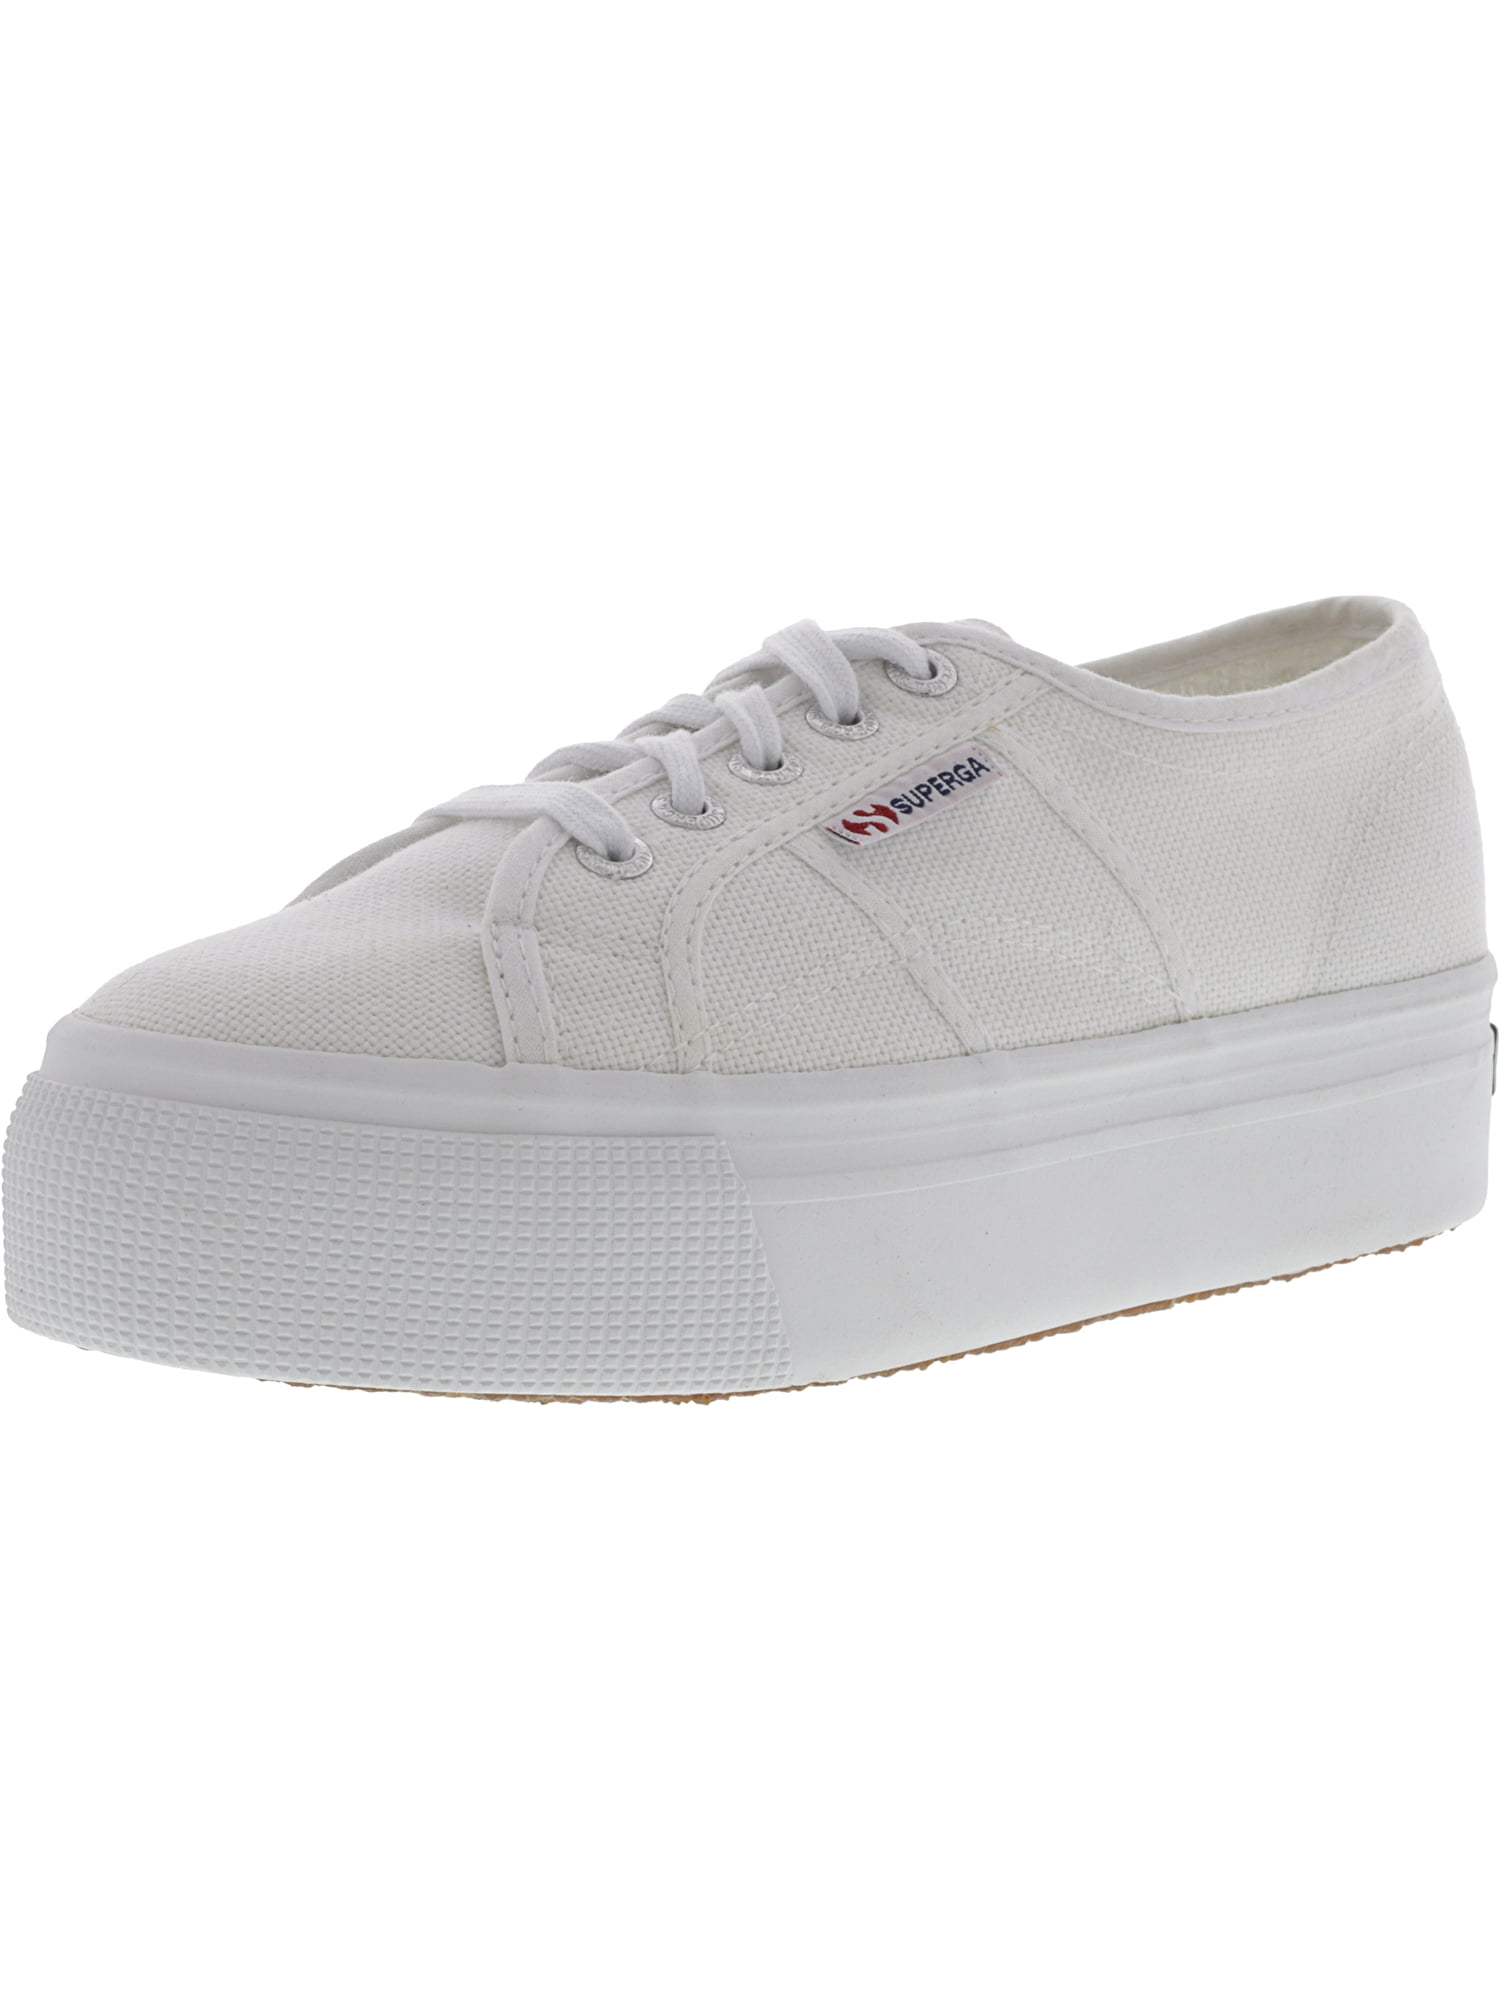 Superga 2790 Acotw Linea Up And Down White Ankle-High Canvas Fashion ...